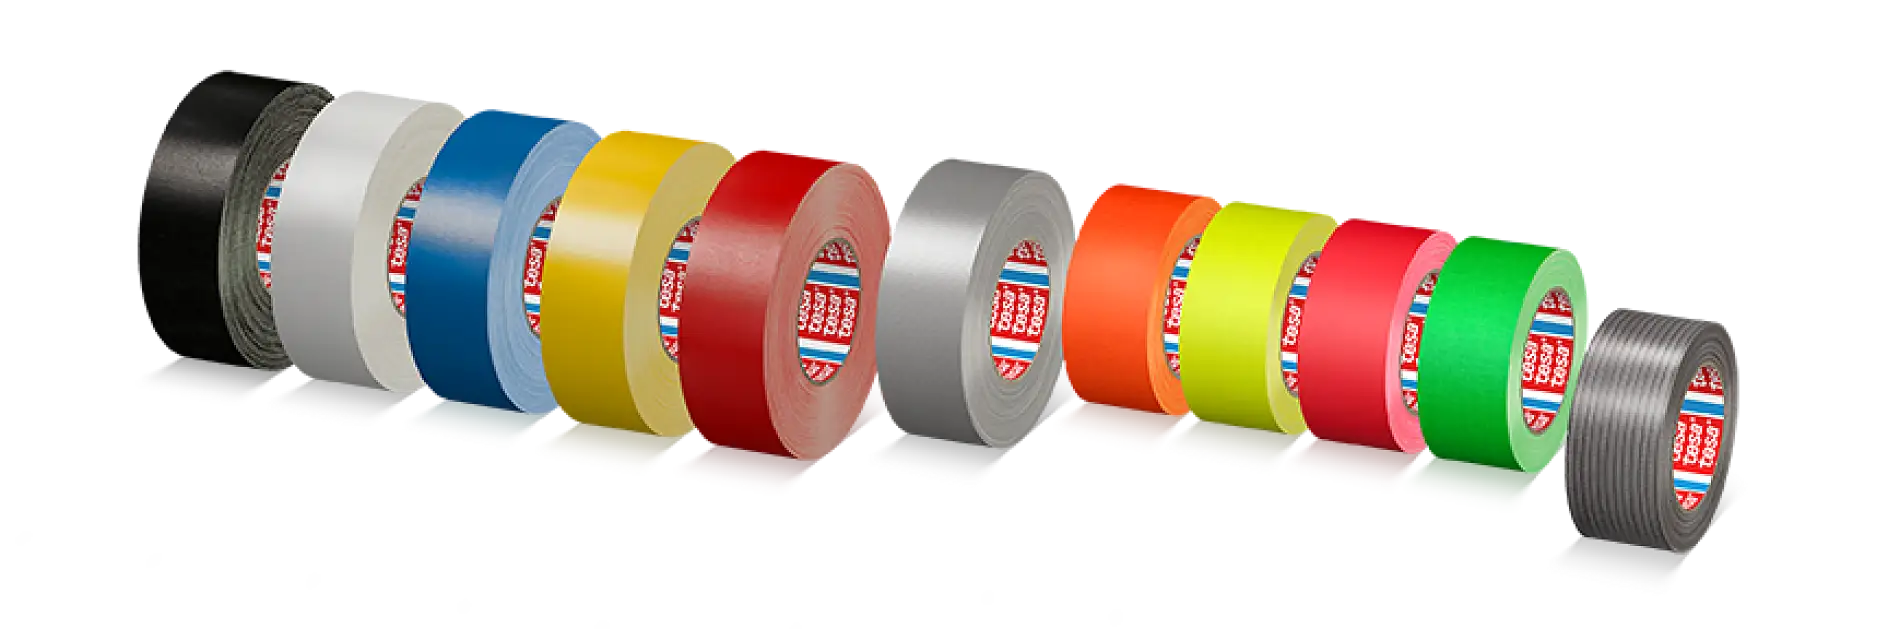 Group-cloth-tapes-001_72dpi